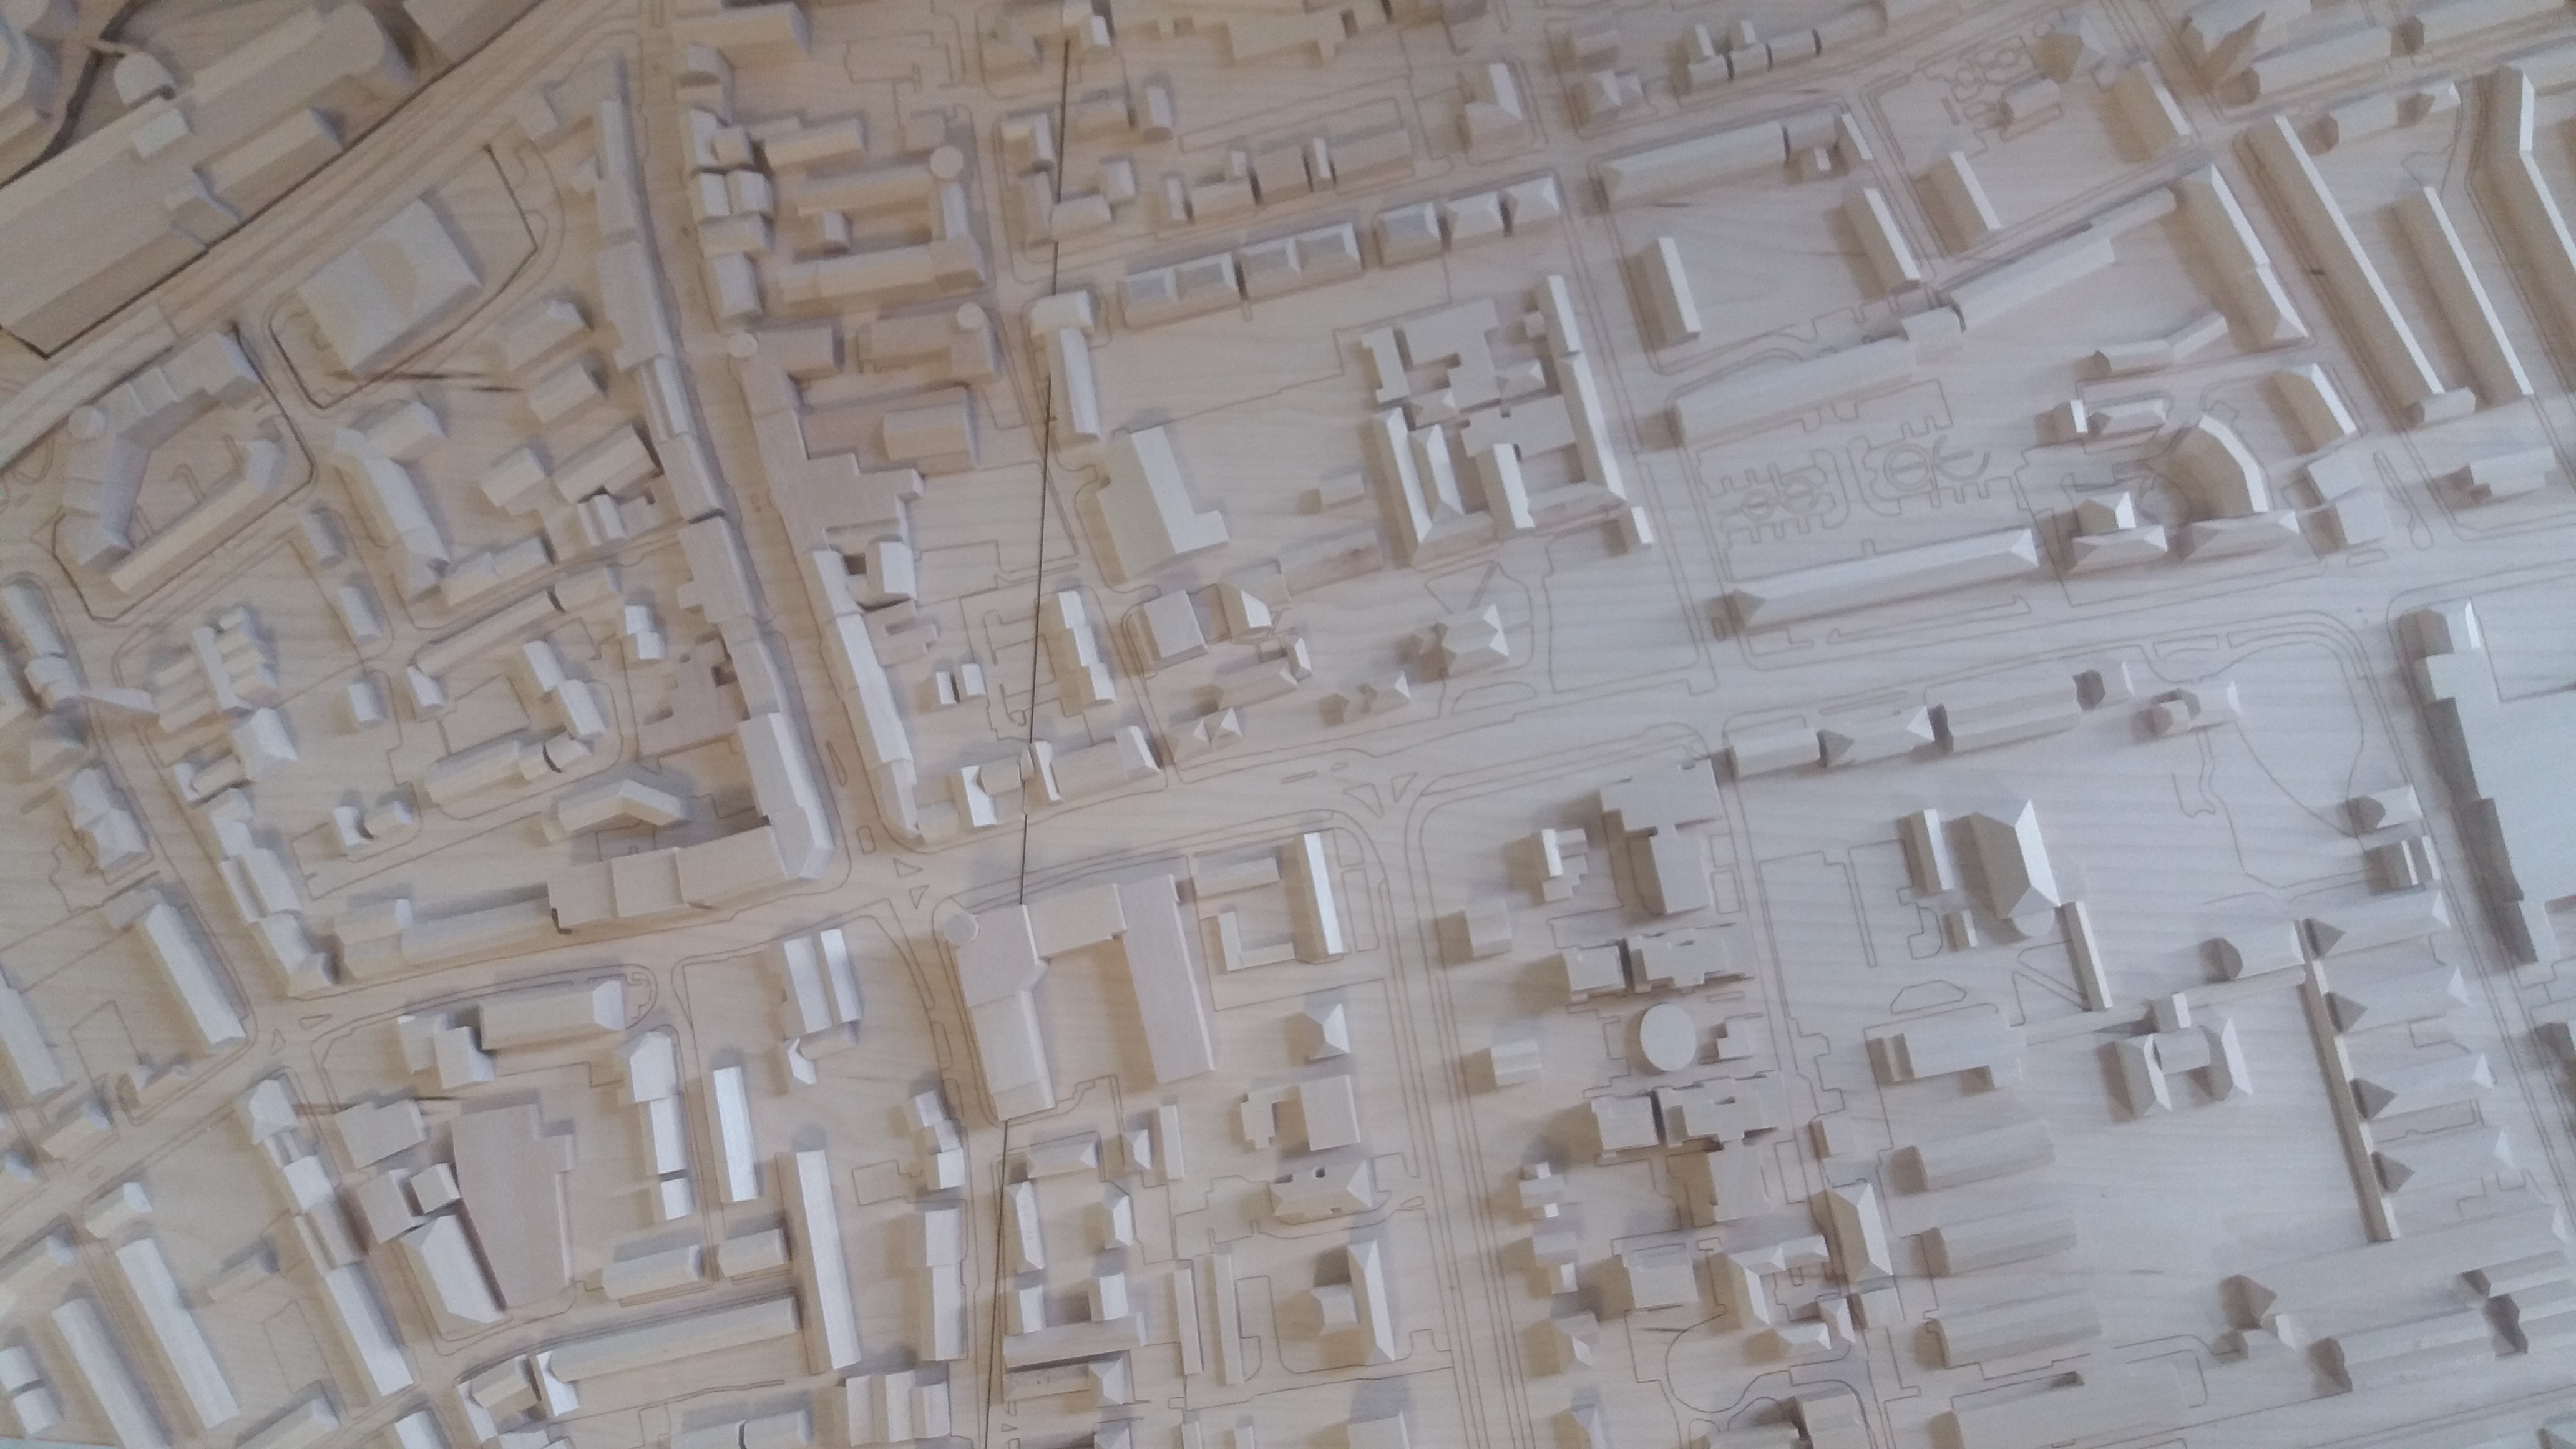 Architectural model donated to School of Architecture